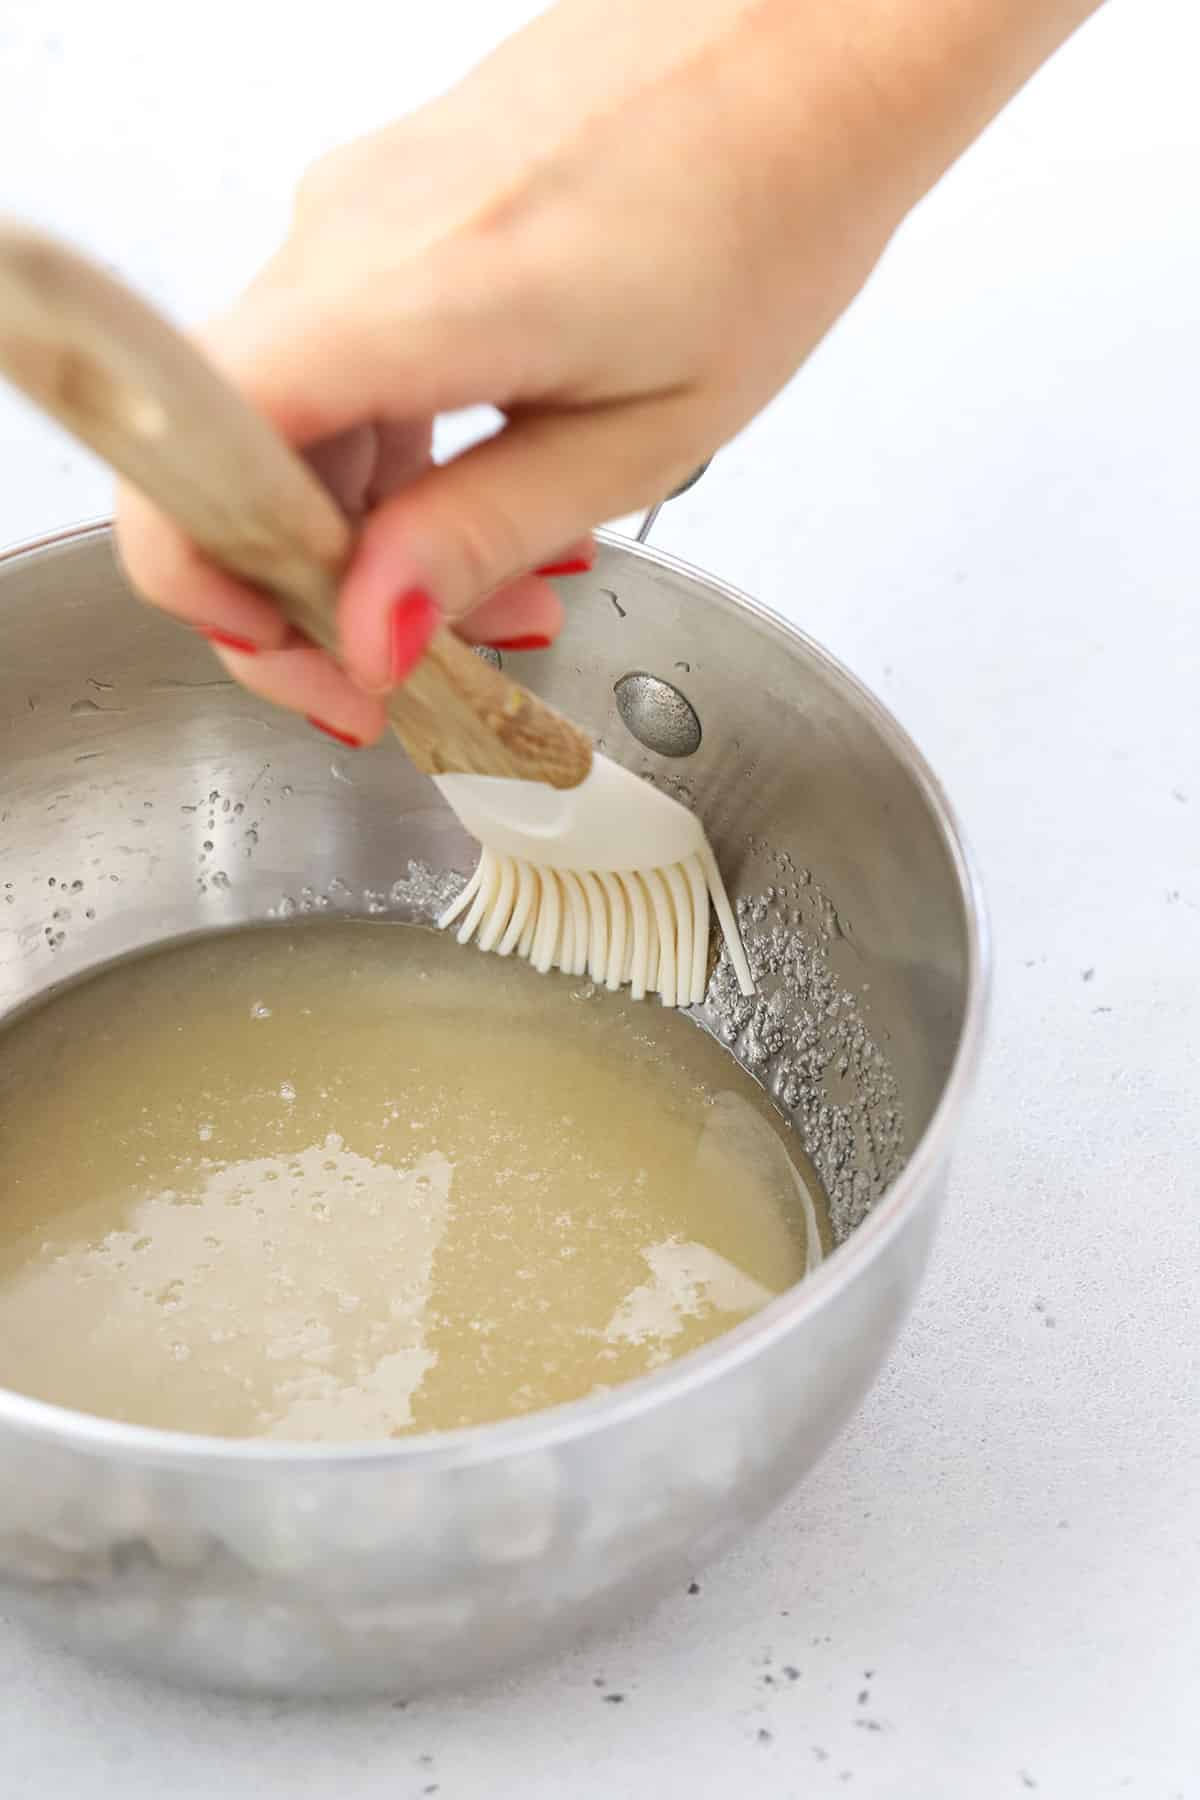 Cleaning sugar crystals off the side of a pan with a pastry brush